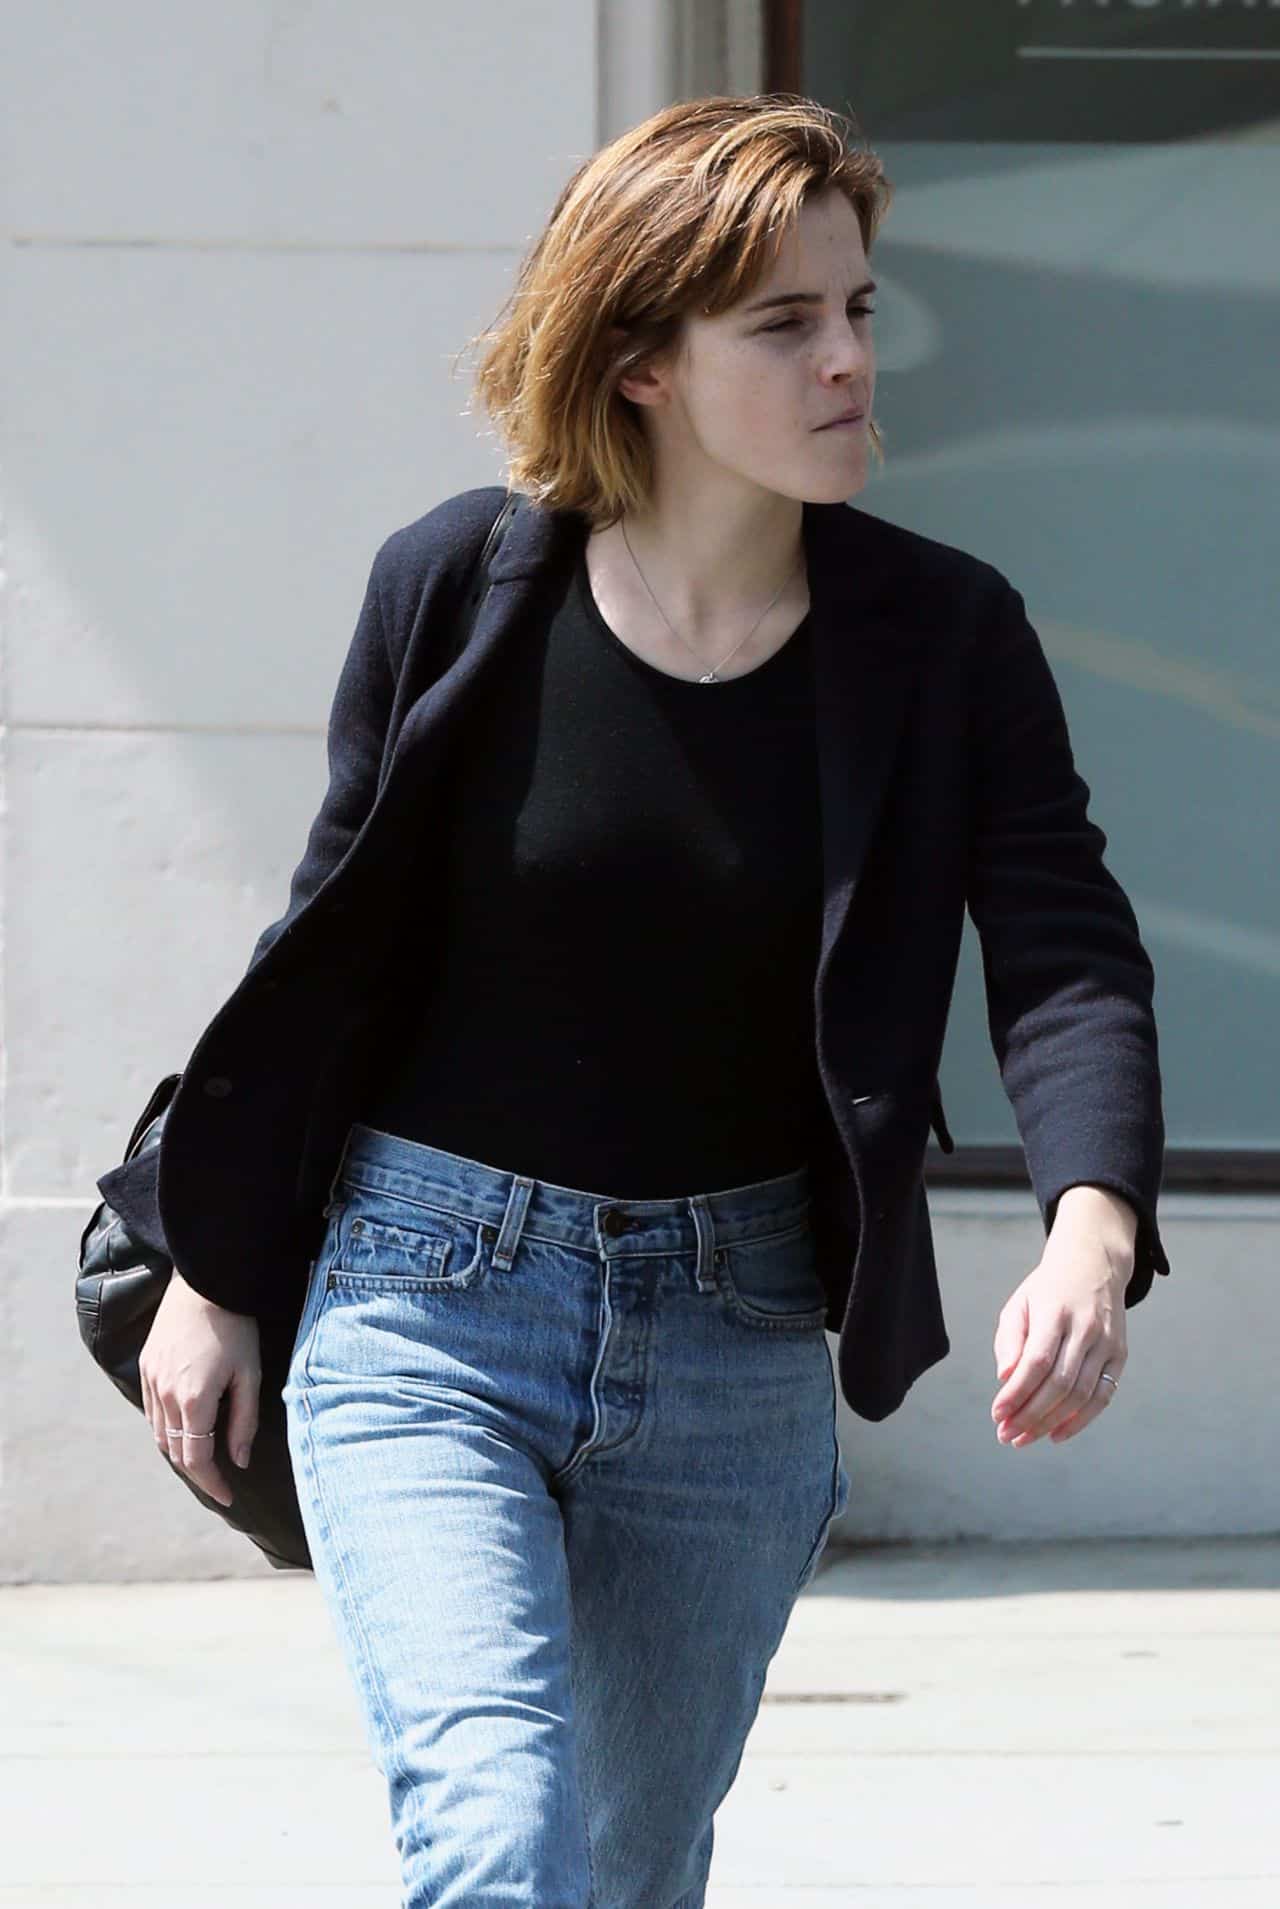 Emma Watson Looked Fresh-faced and Beautiful while Running Errands in LA